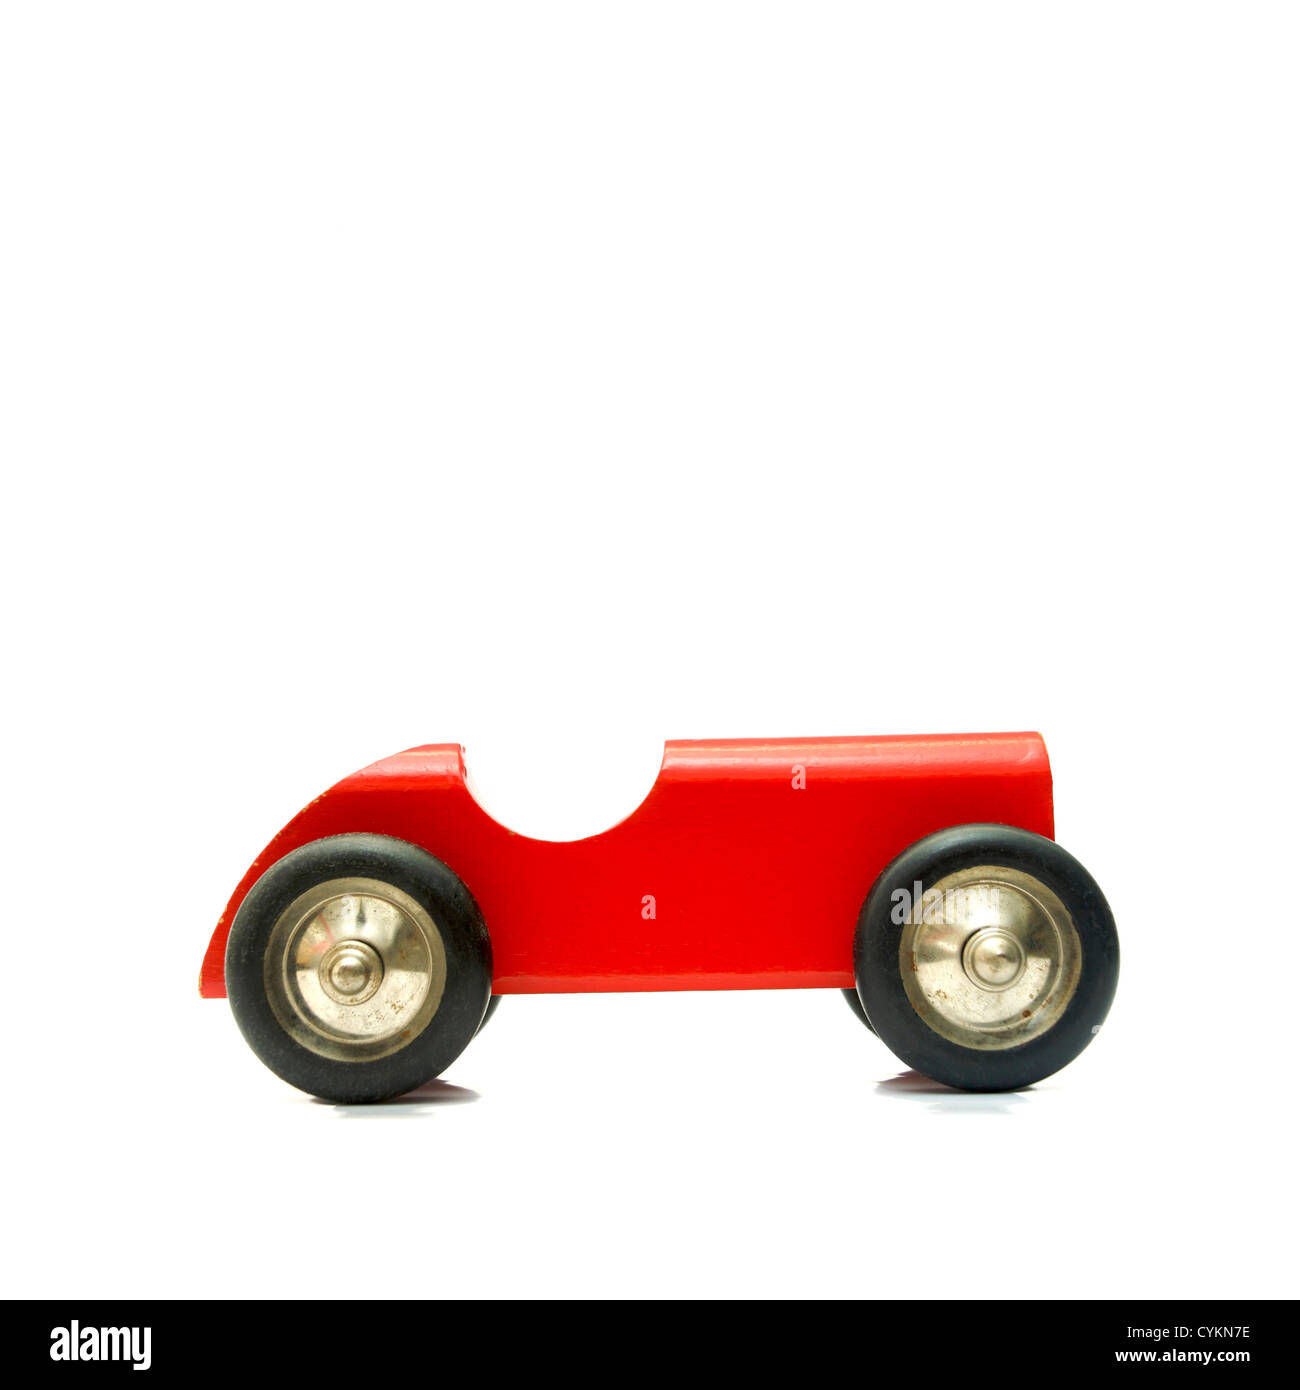 Wooden red toy car, vintage look Stock Photo